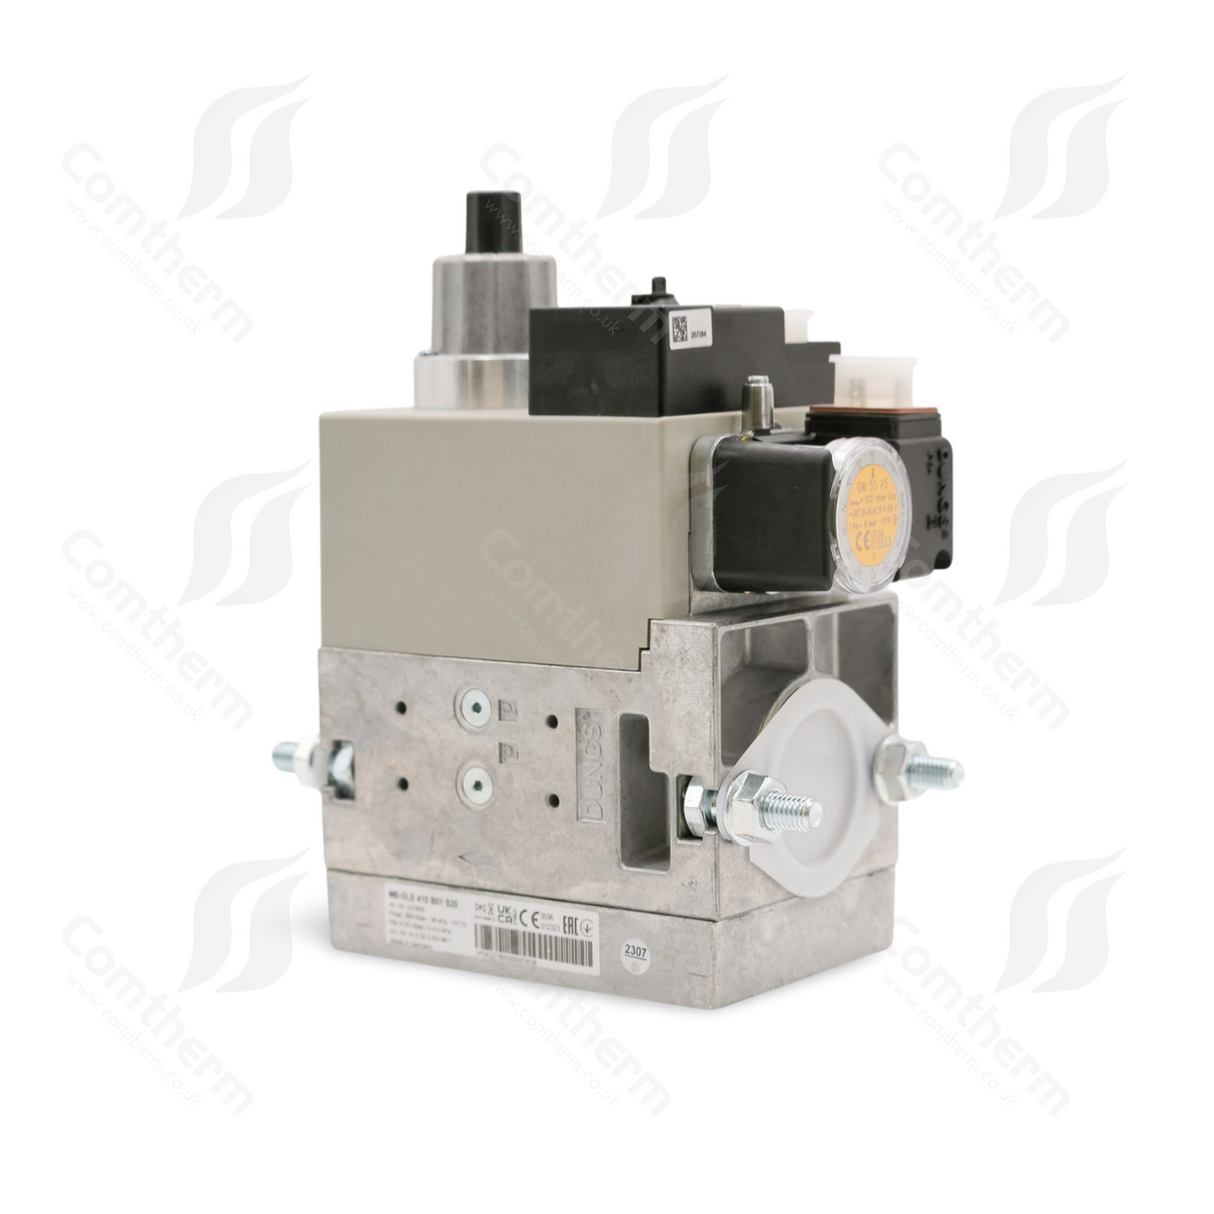 Dungs MB-DLE 410 B01 S50 + GW150A5 Multibloc Gas Valve - 110v